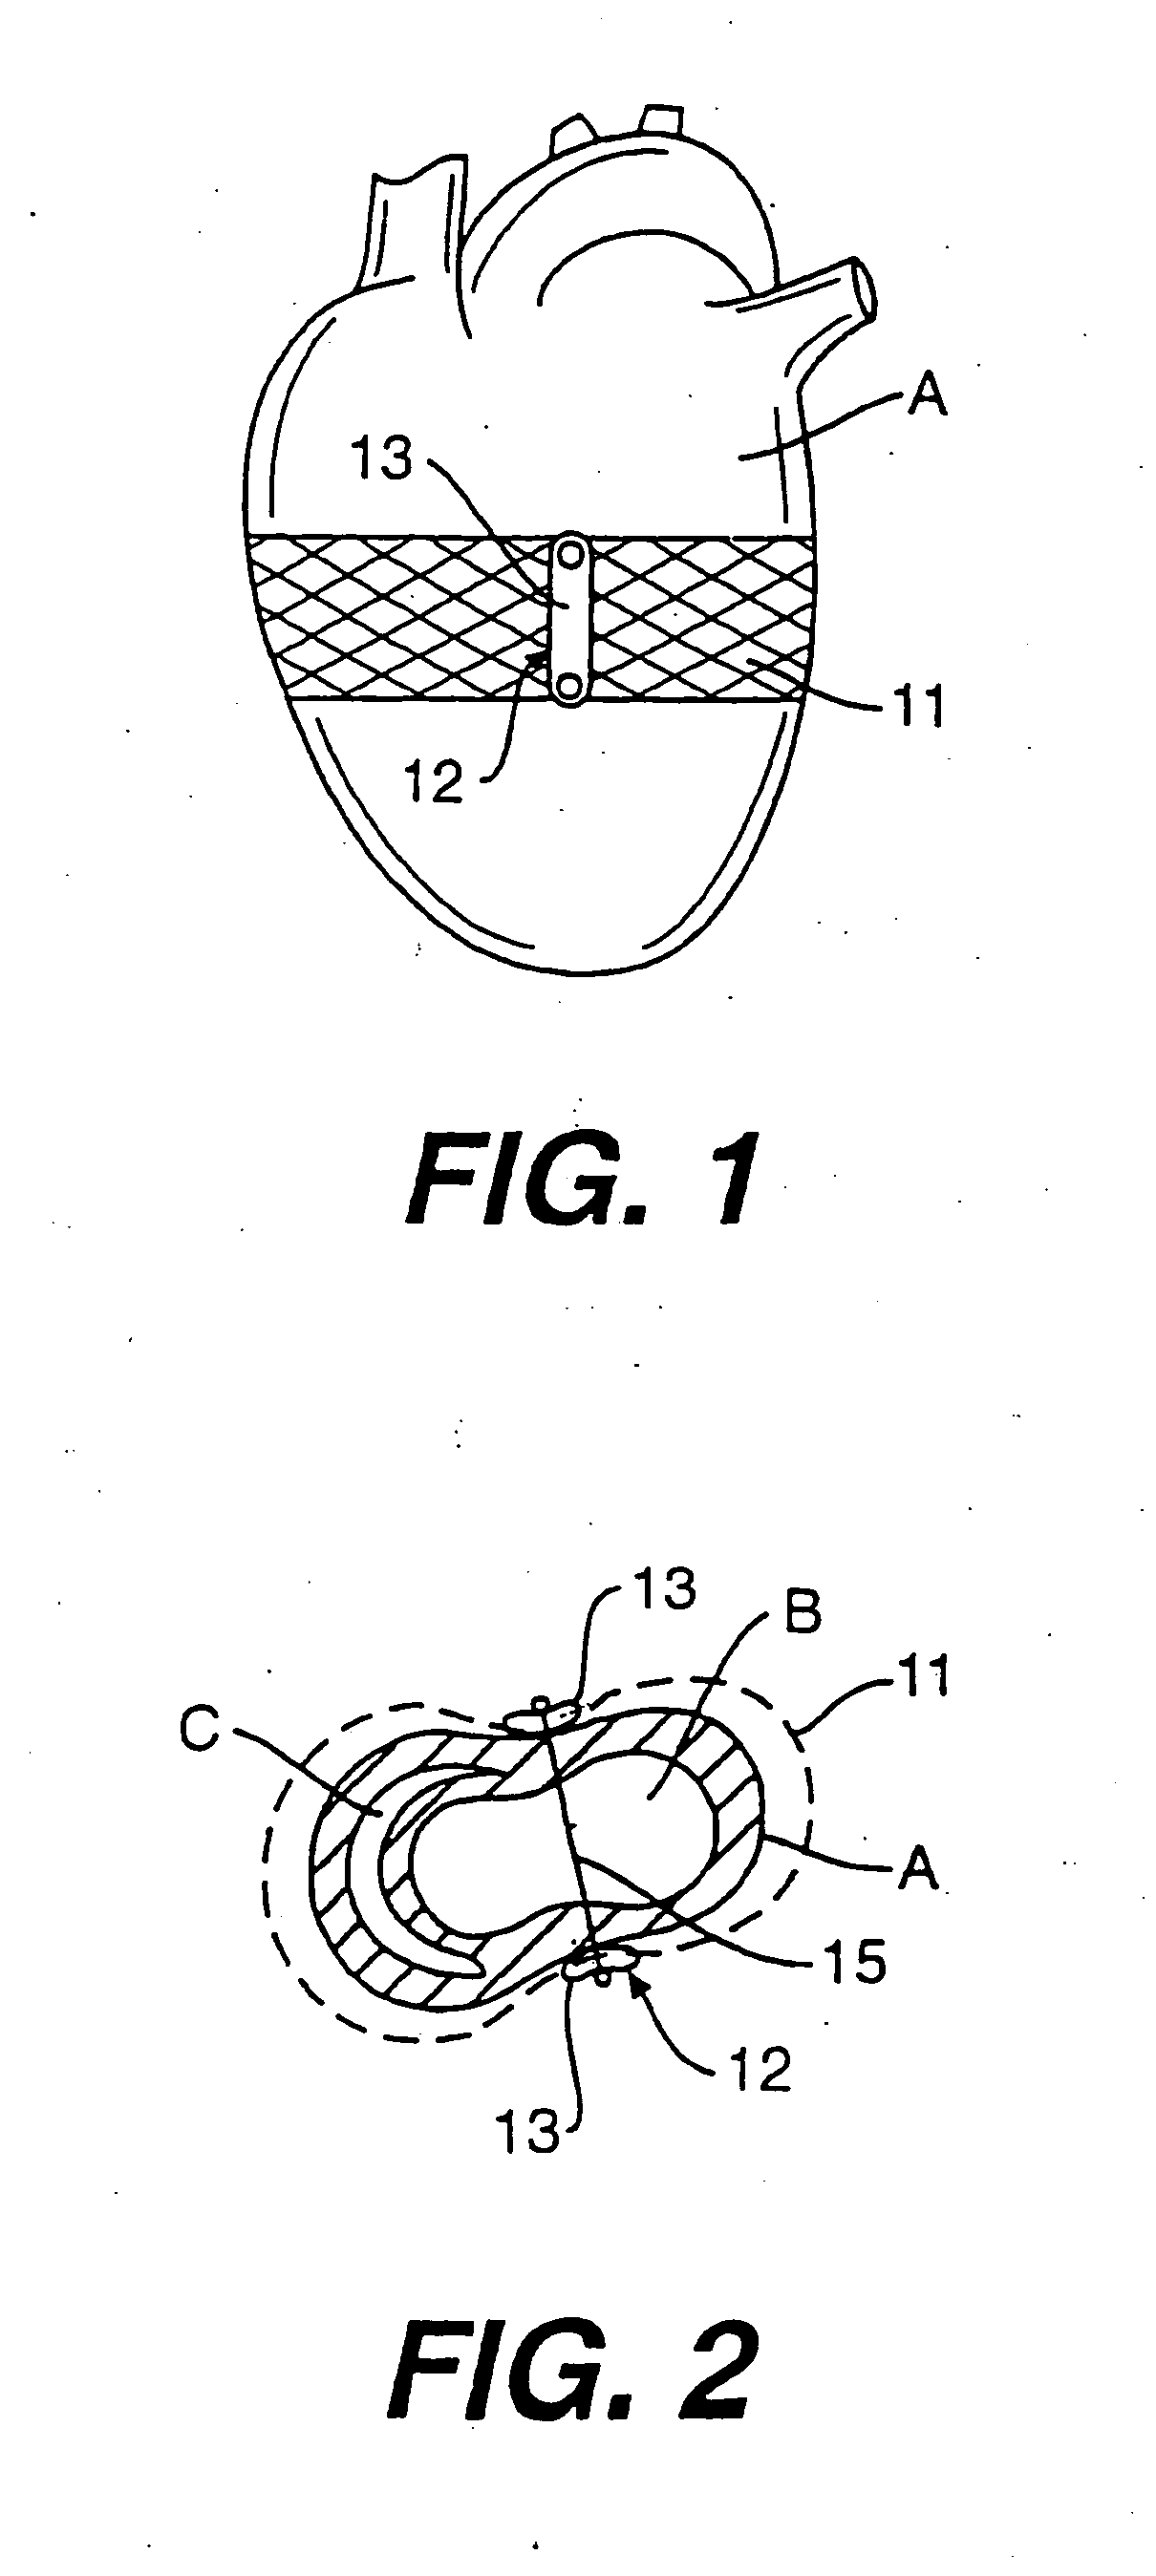 Heart wall tension reduction apparatus and method